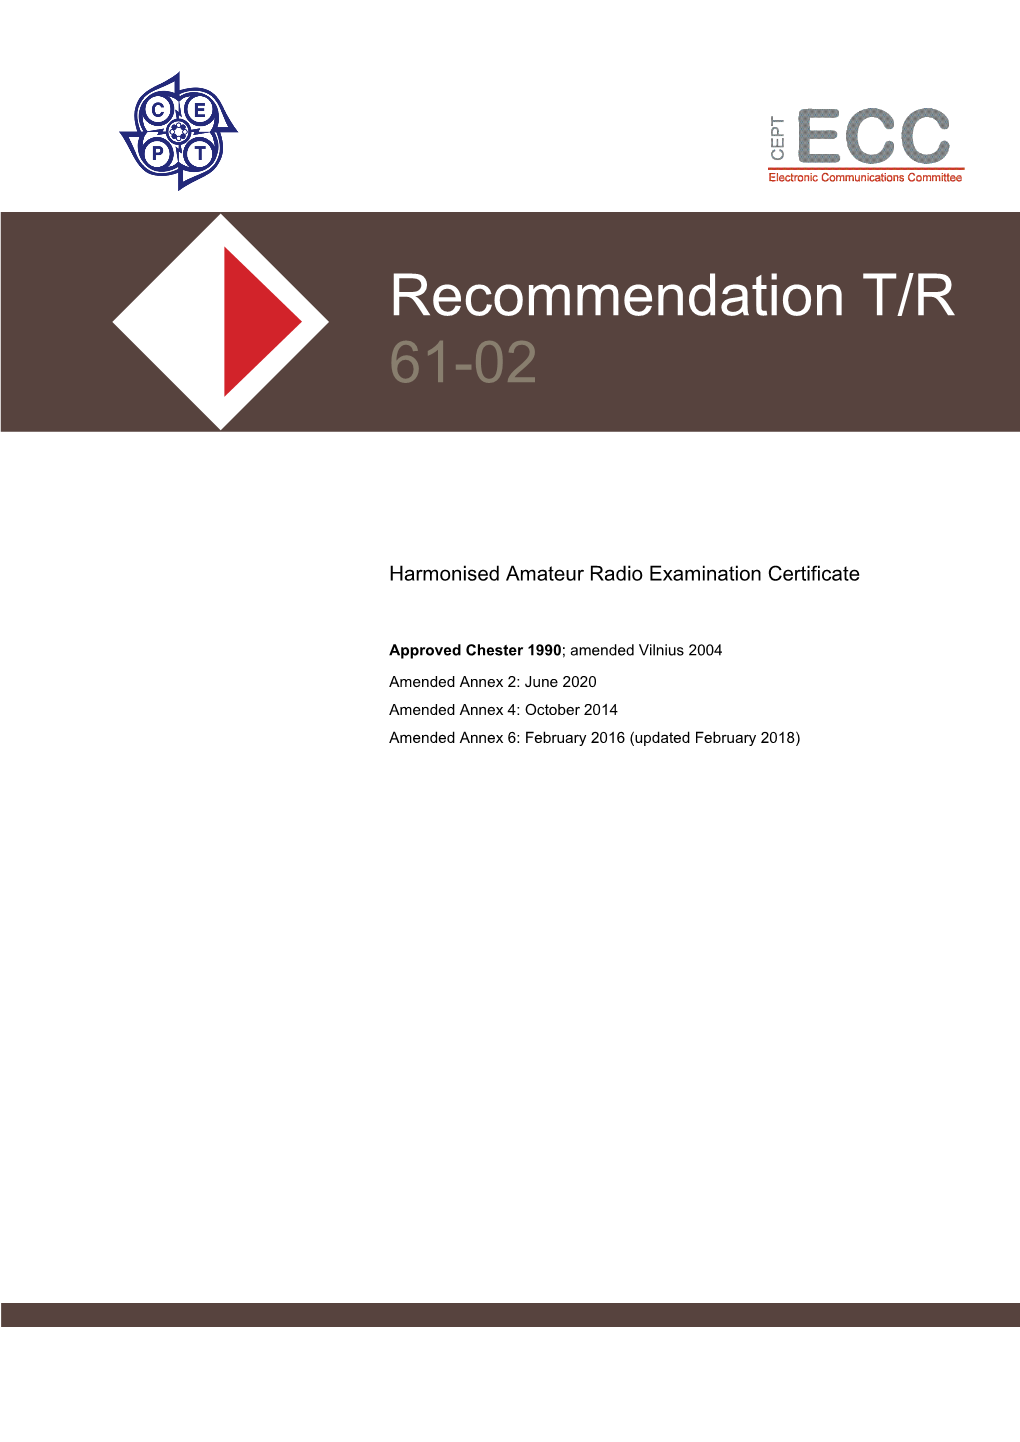 RECOMMENDATION T/R 61-02 – Page 2